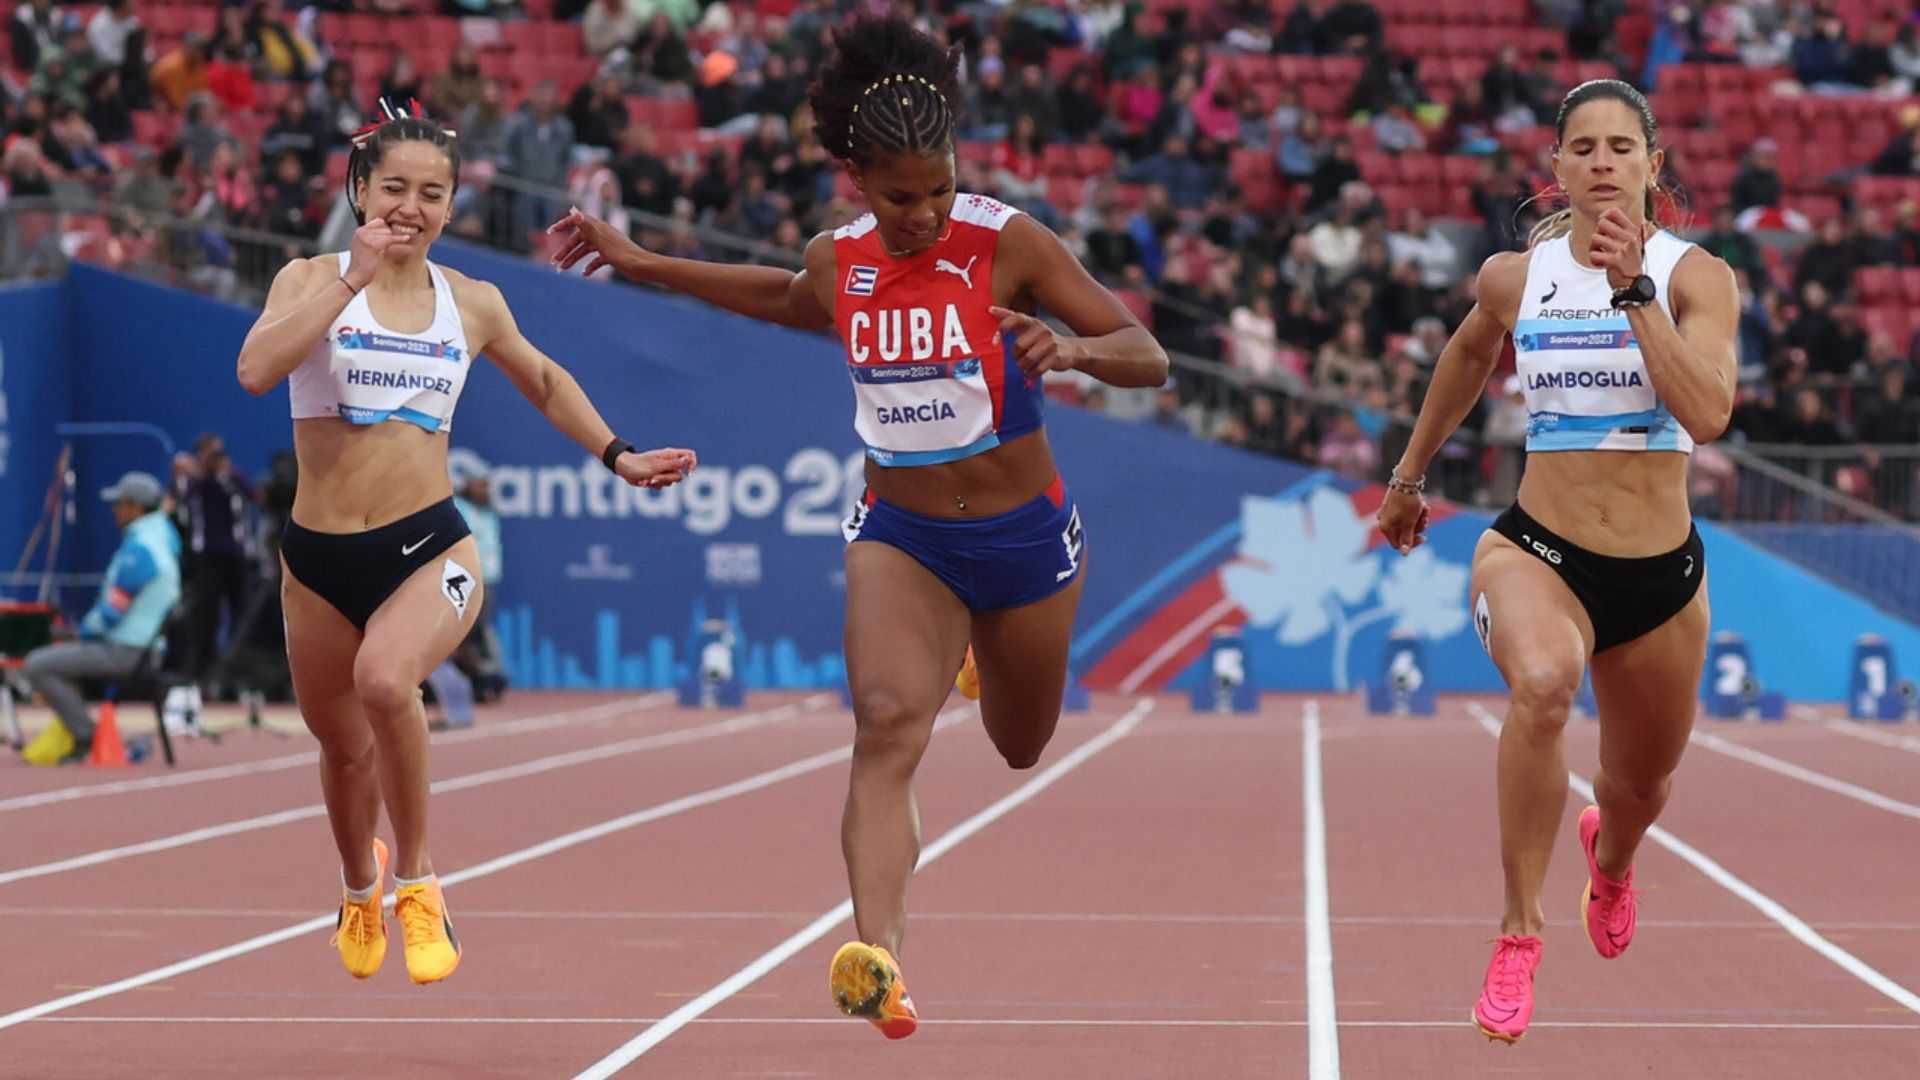 The female's 100 meters determine their finalists